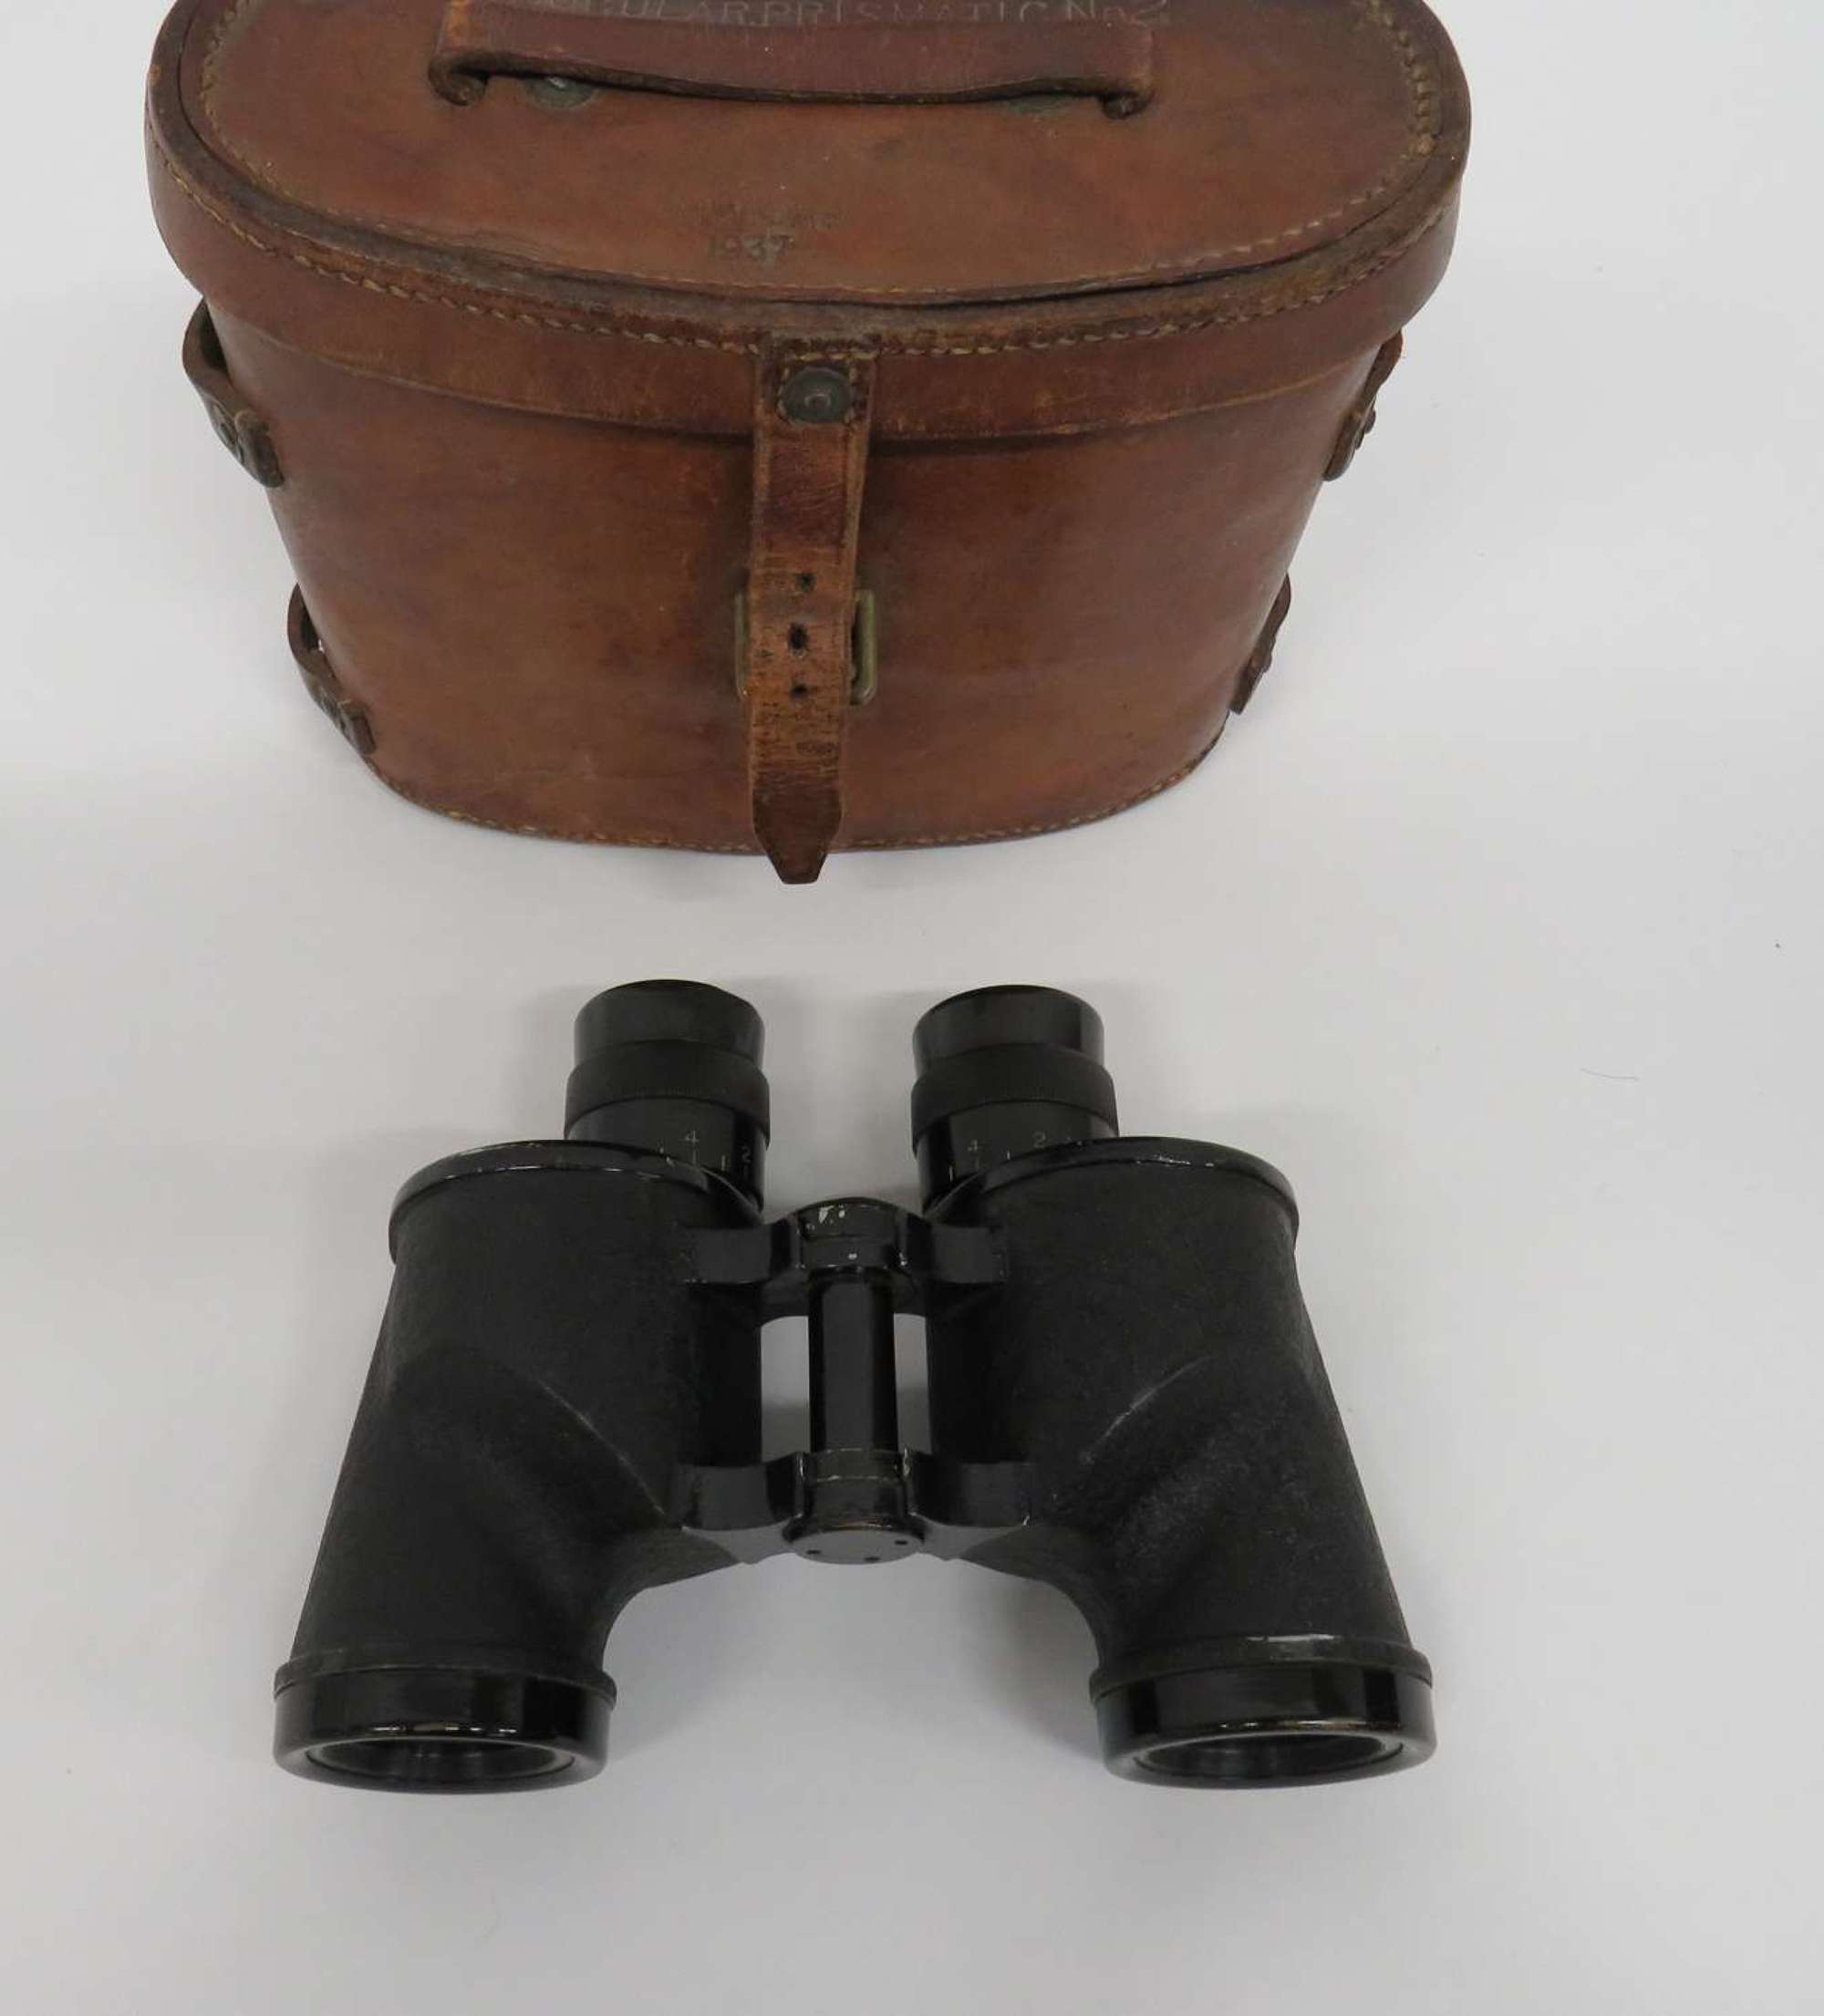 1944 Dated Canadian Issue Binoculars and Leather Case